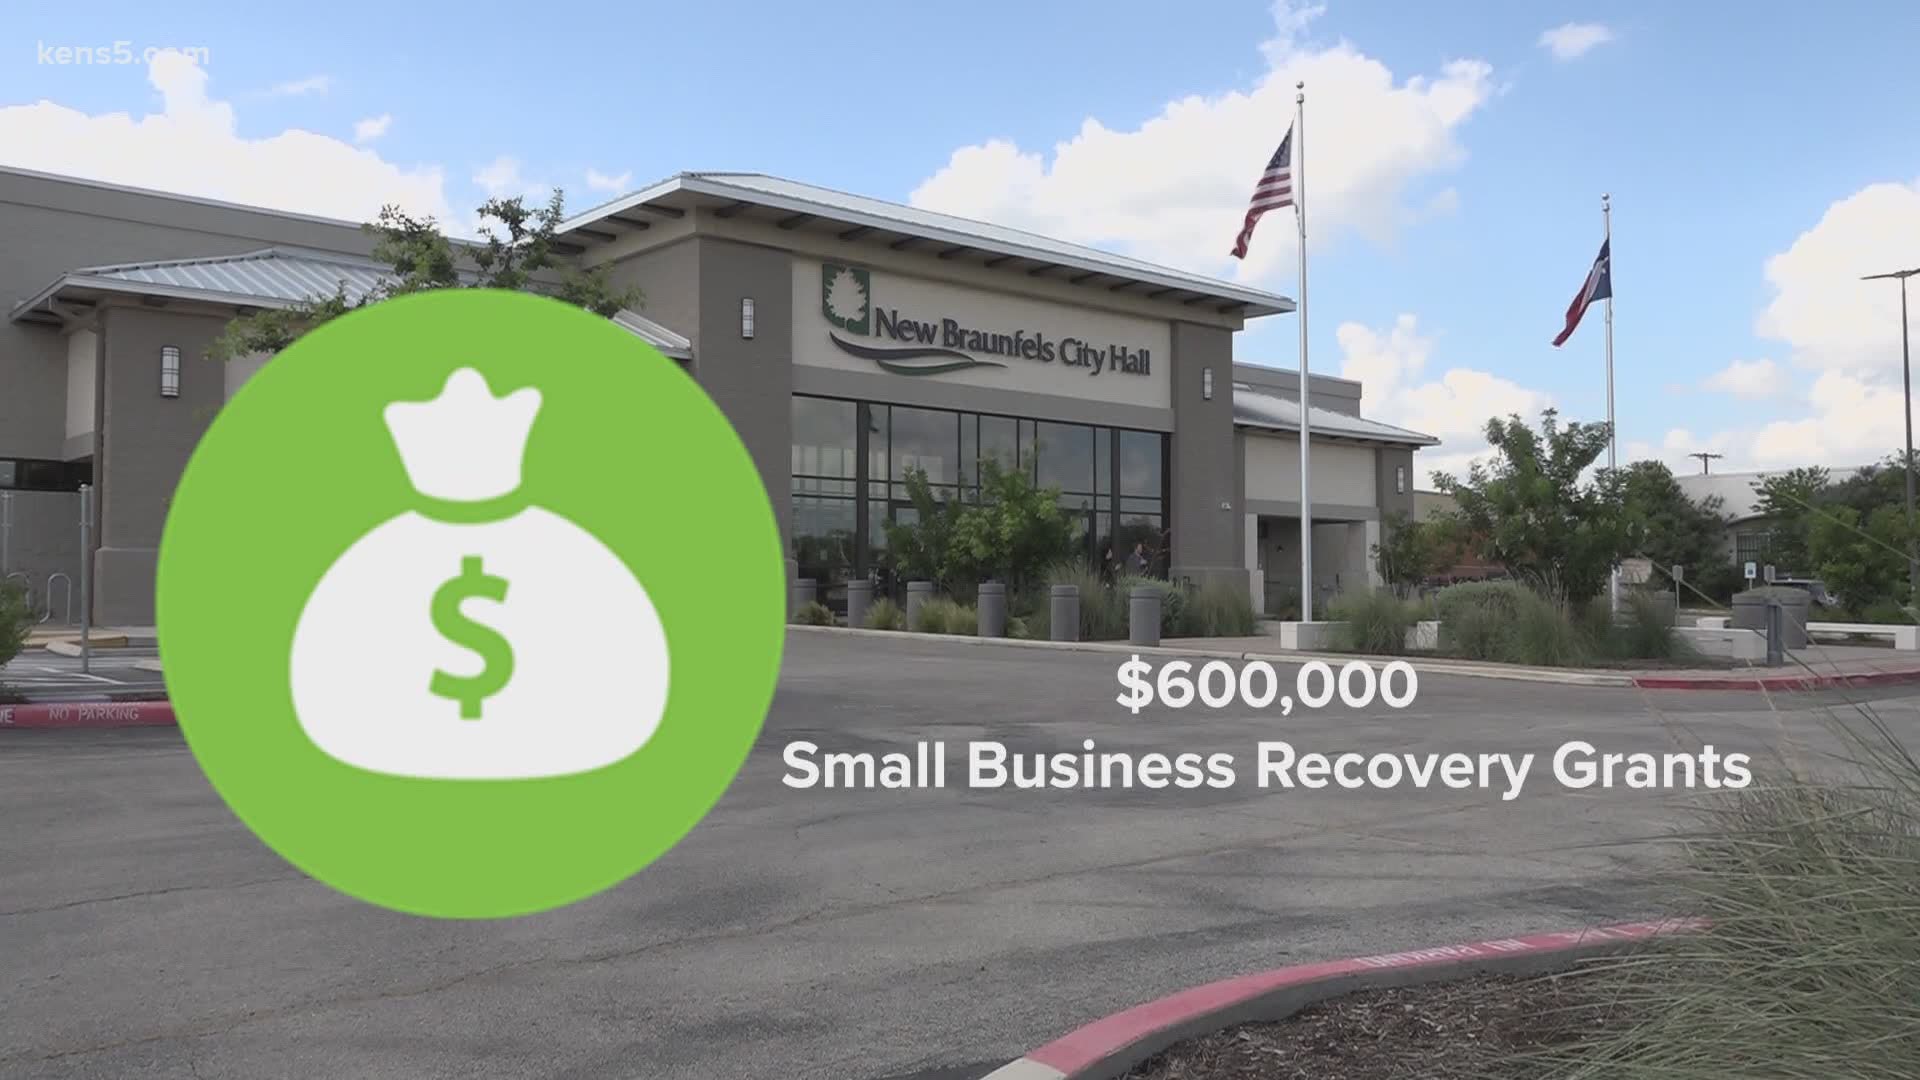 Many Texas shop owners are still treading water. The City of New Braunfels is throwing a life raft to its small businesses with a recovery grant program.